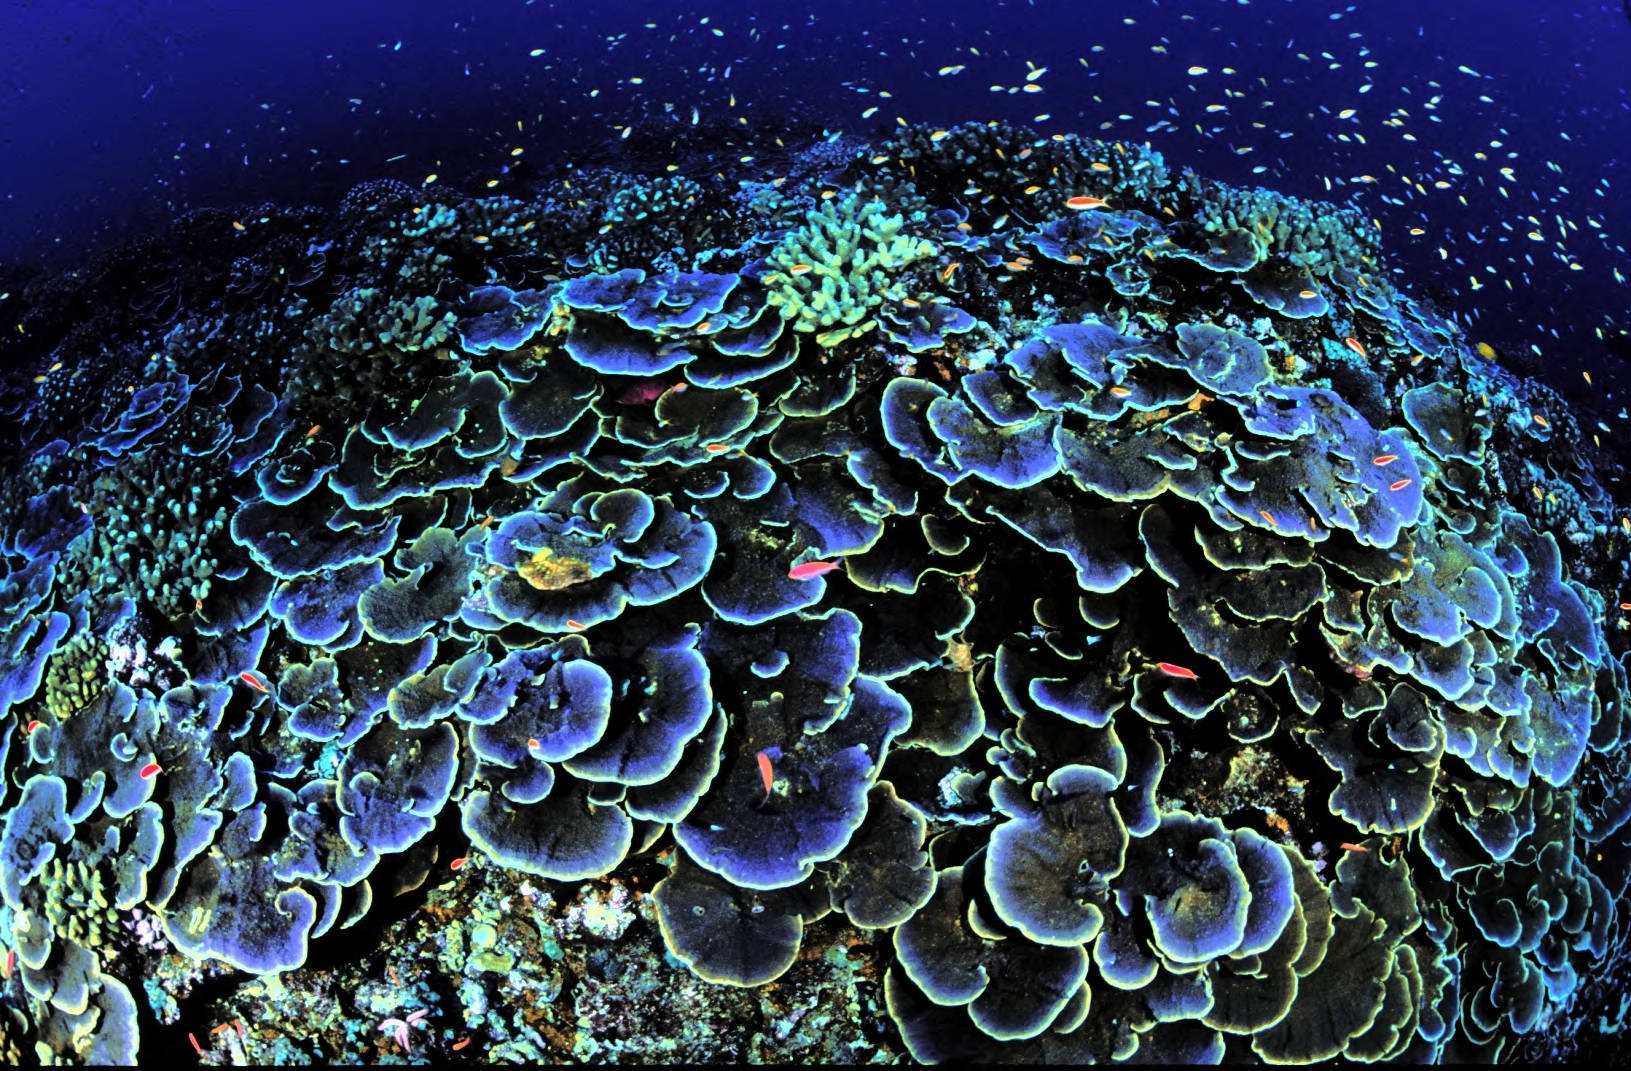 https://commons.wikimedia.org/wiki/File:Coral_at_Jarvis_Island_National_Wildlife_Refuge.jpg